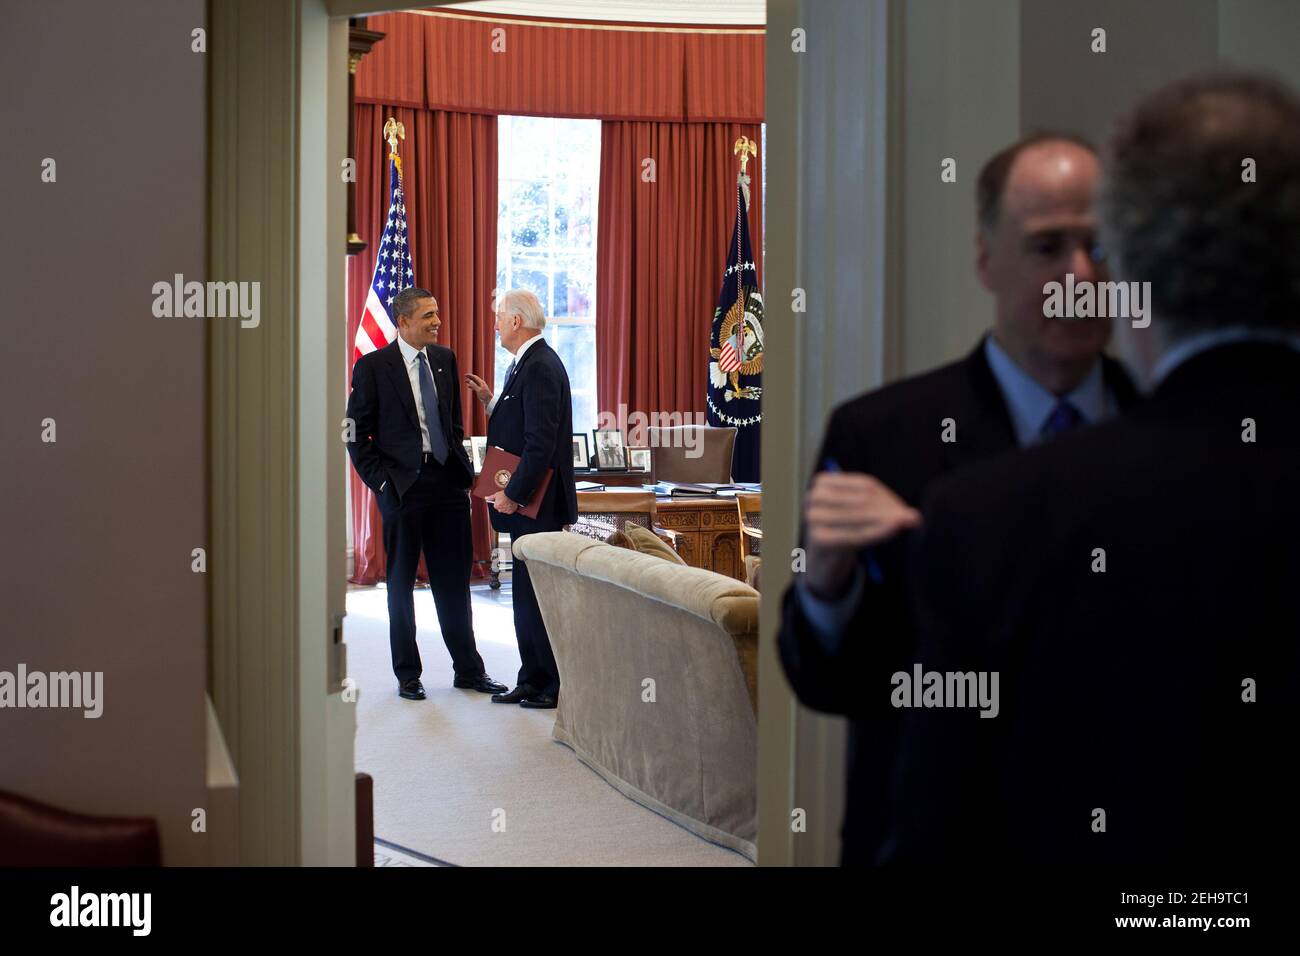 President Barack Obama talks with Vice President Joe Biden in the Oval Office while National Security Advisor Tom Donilon and Counsel to the President Bob Bauer, right, confer in the Outer Oval Office, Jan. 5, 2011. Stock Photo